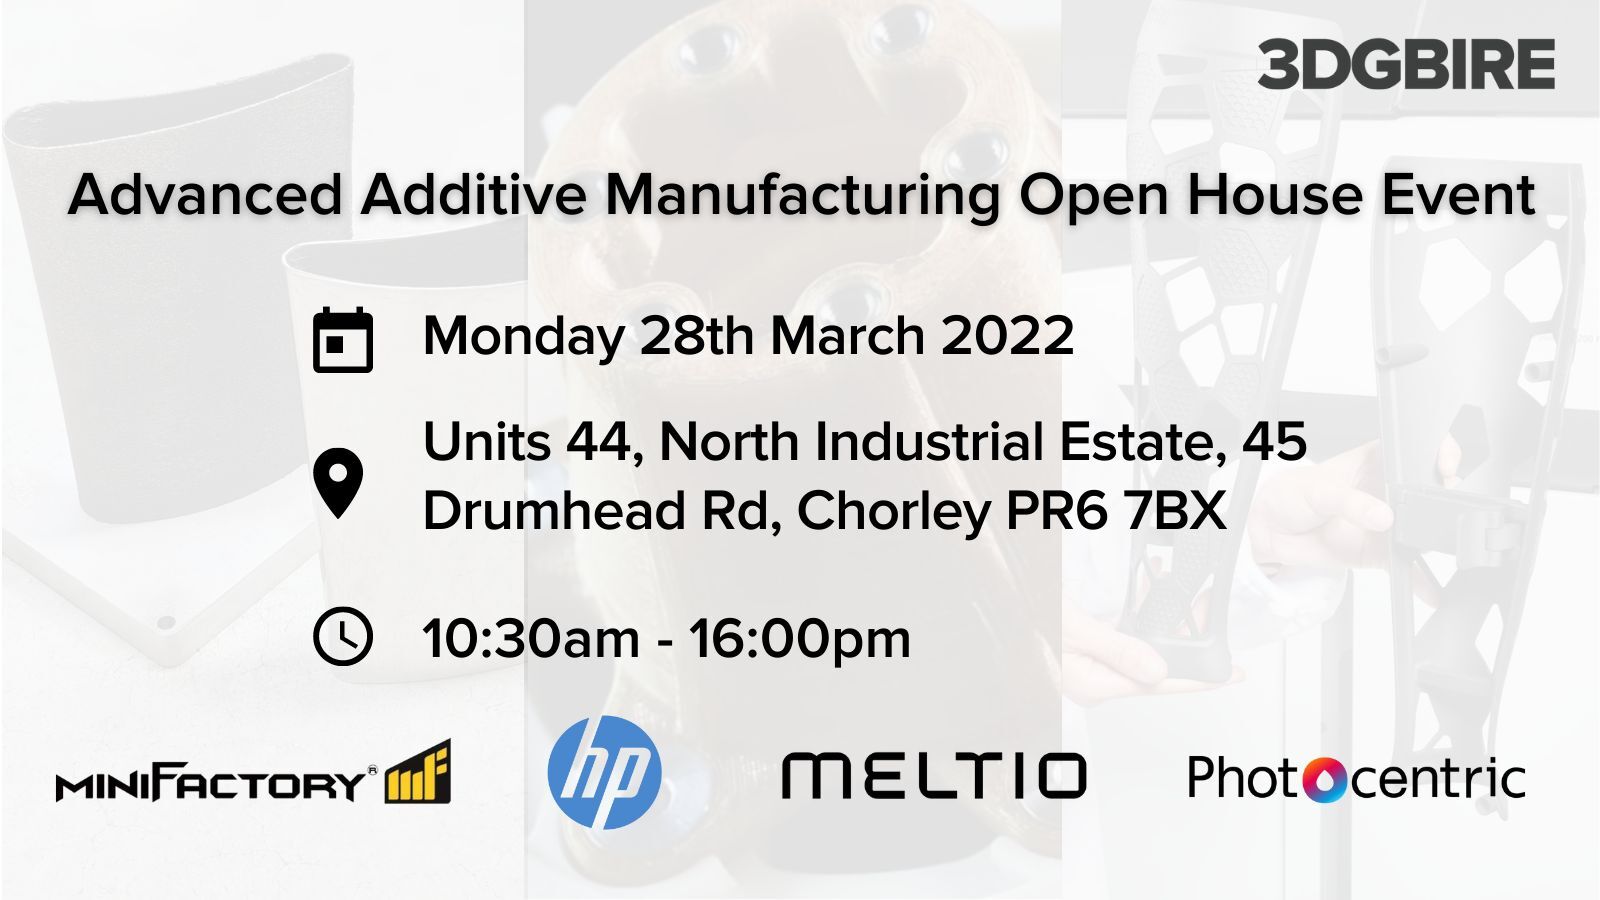 Want to learn more about Advanced Additive Manufacturing?